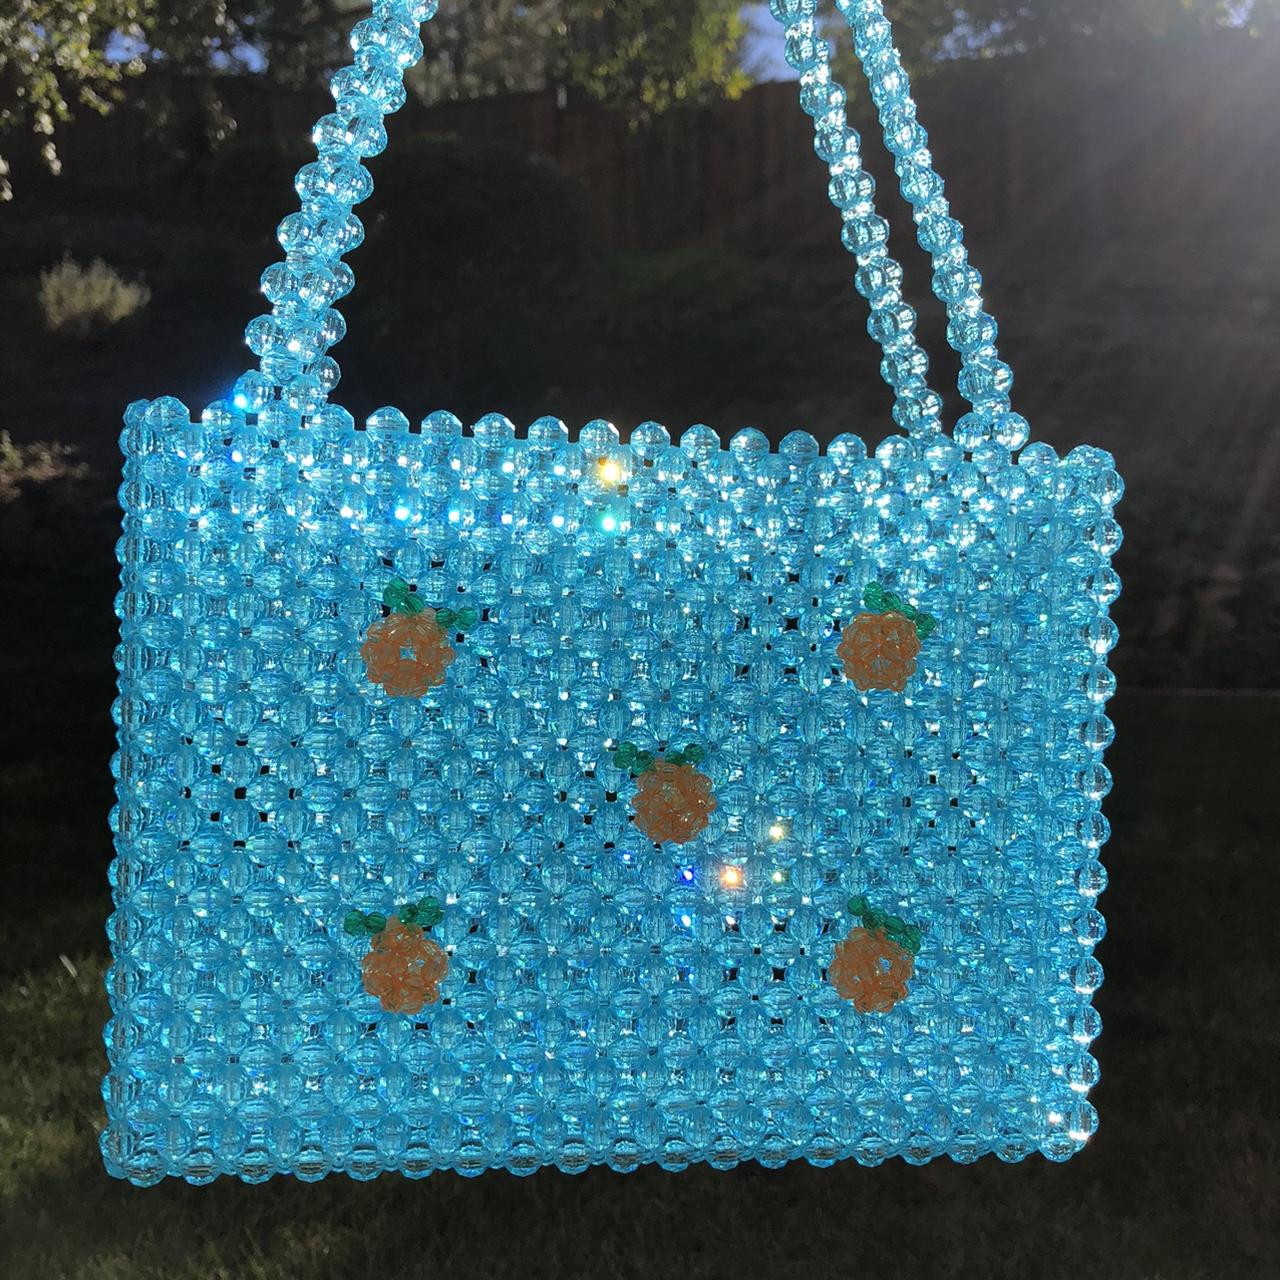 New Toyboy jelly purse in cobalt blue. Gold accents. - Depop